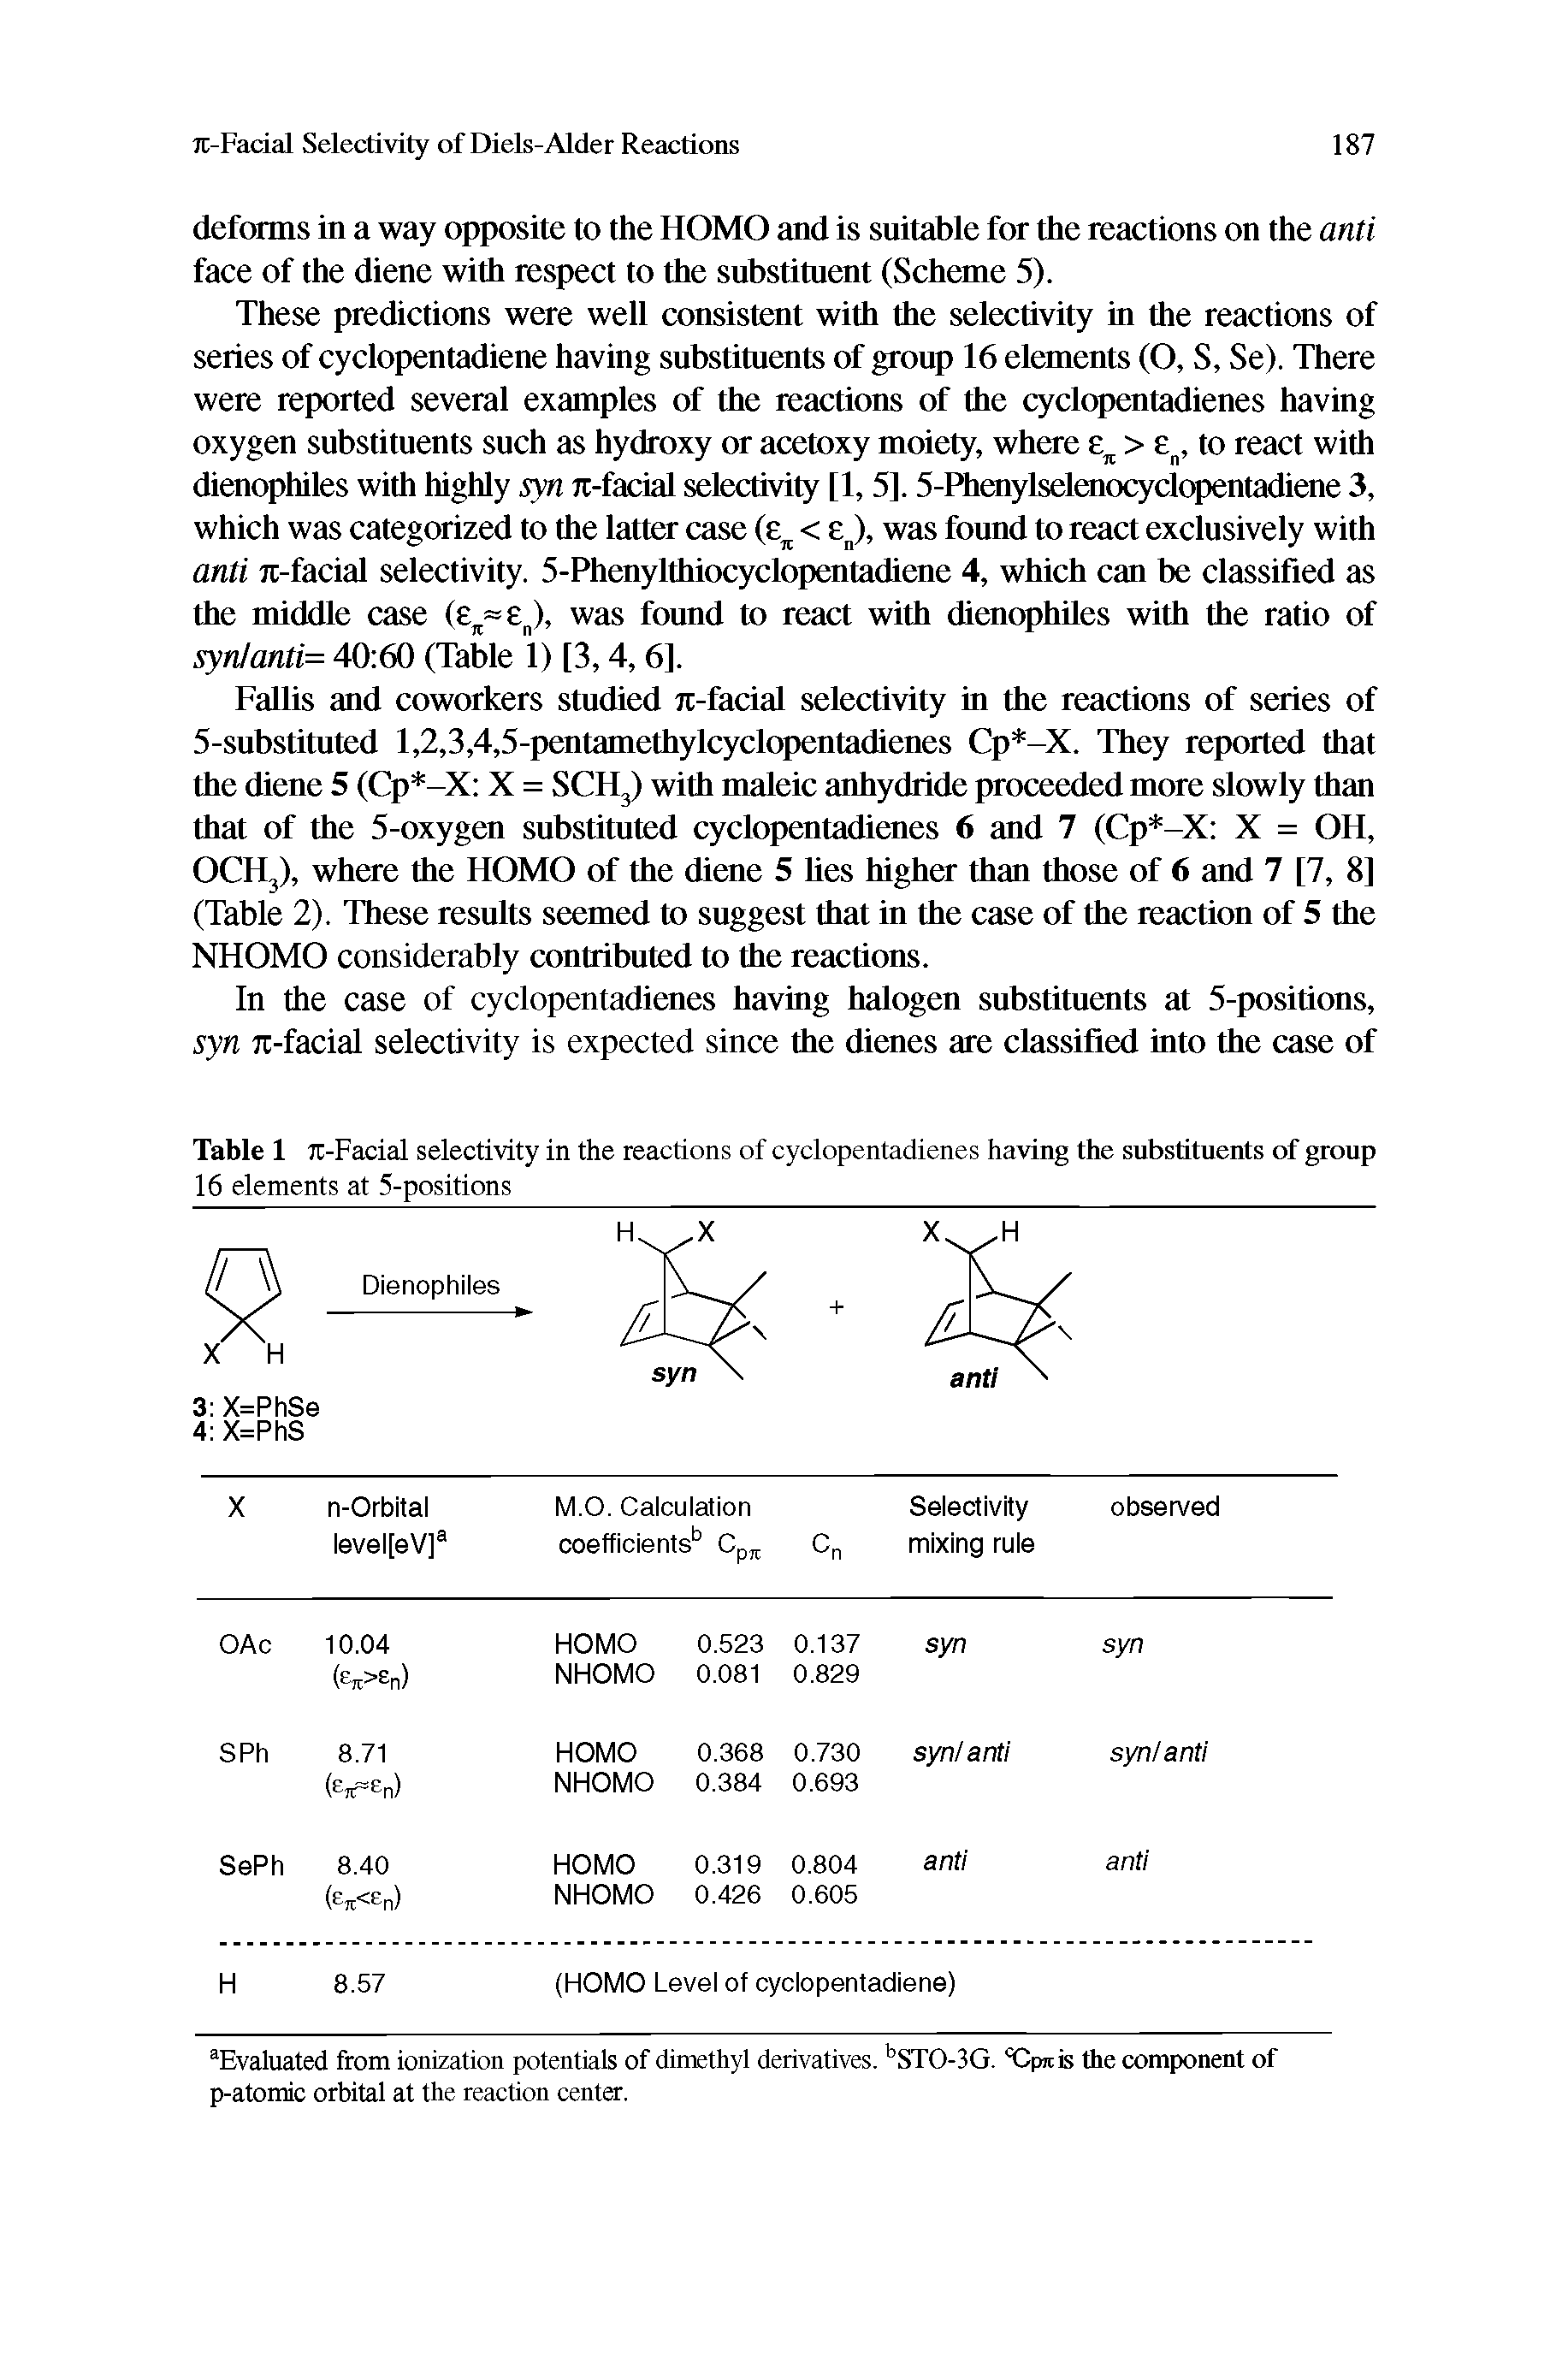 Table 1 Jt-Facial selectivity in the reactions of cyclopentadienes having the substituents of group 16 elements at 5-positions...